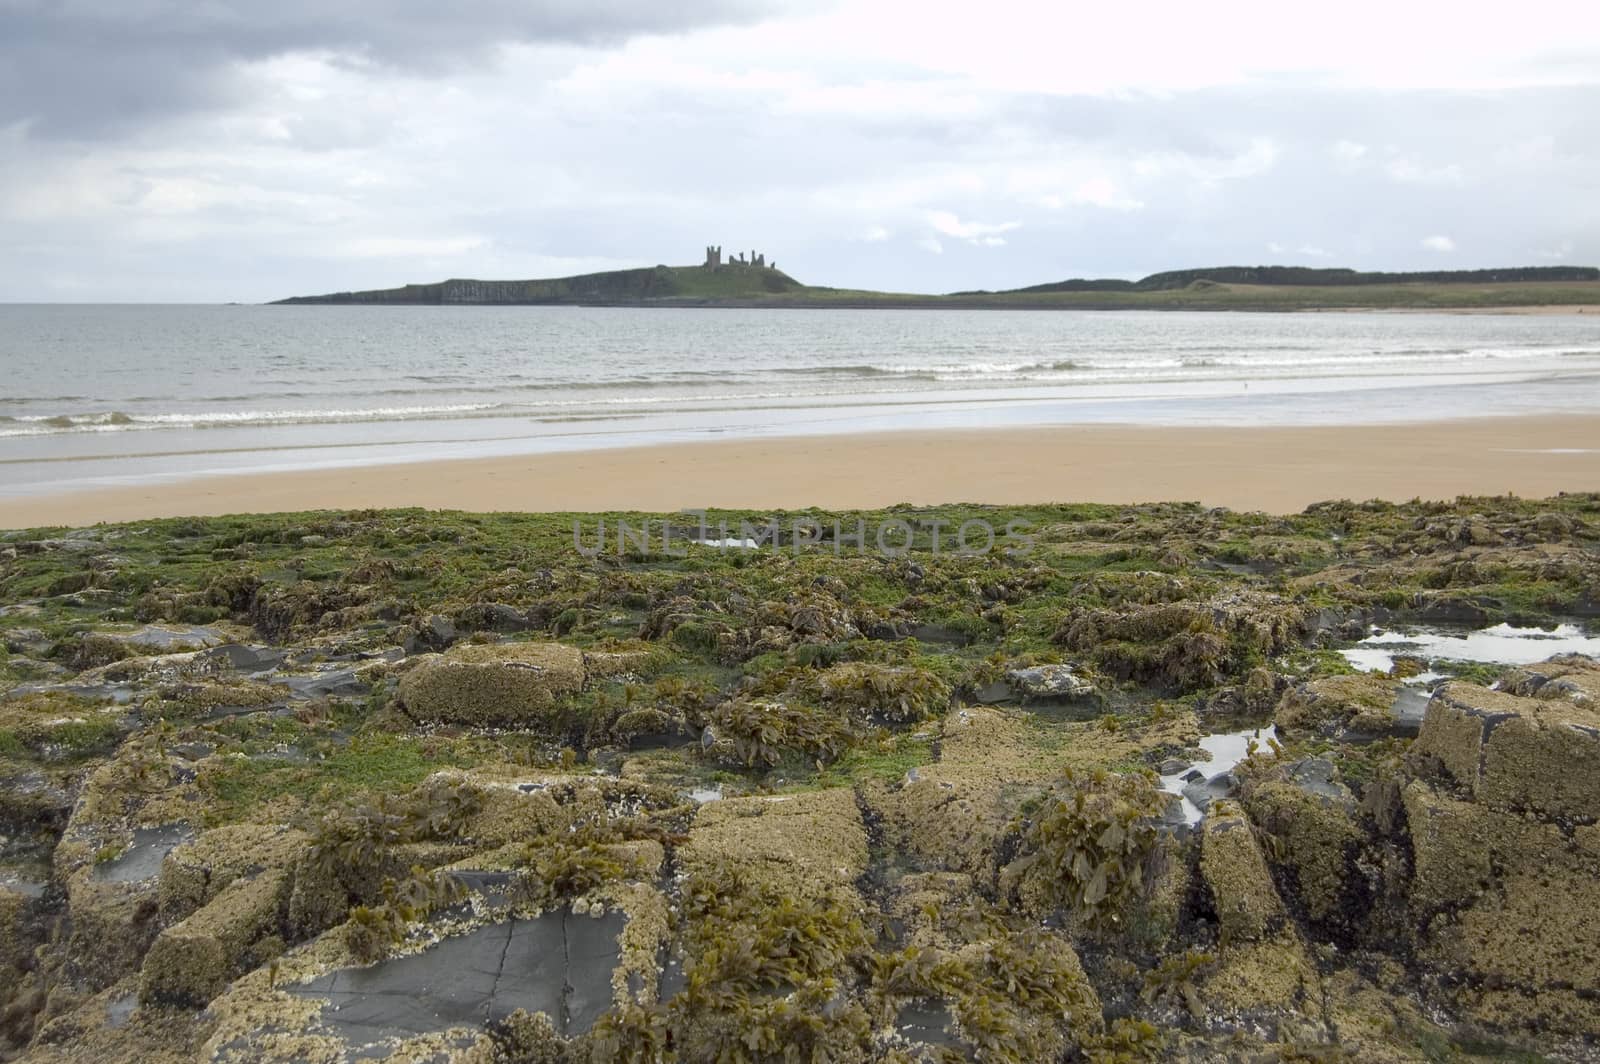 The Ruin of Dunstanburgh castle on the Northumbrian coast with seaweed encrusted rocks in foreground